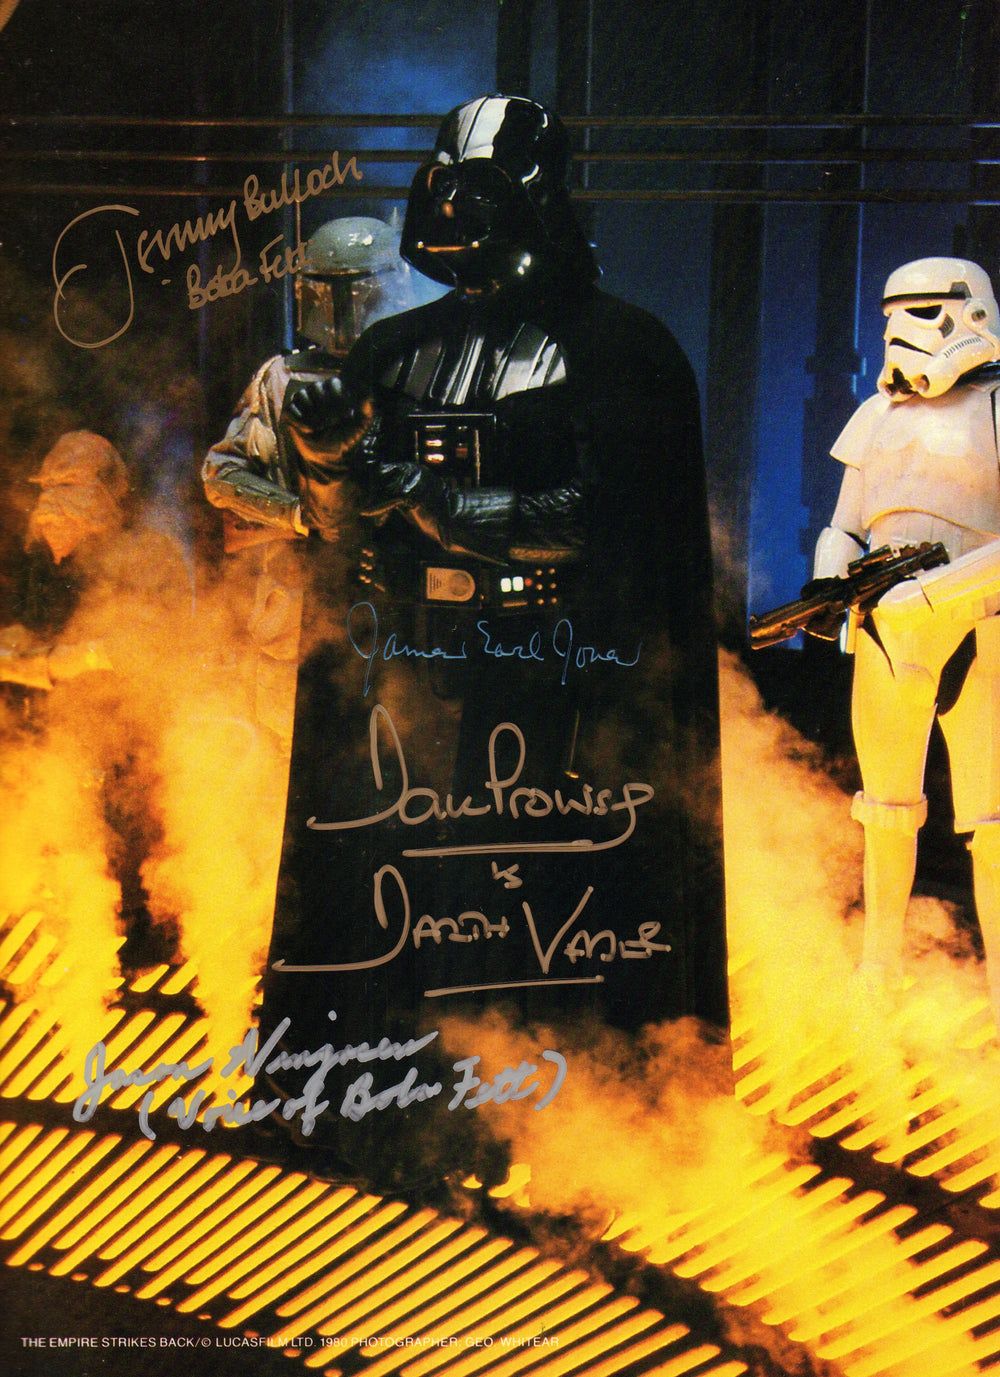 James Earl Jones & Dave Prowse as Darth Vader with Jeremy Bulloch & Jason Wingreen as Boba Fett in Star Wars: The Empire Strikes Back Signed 8x10 Photo